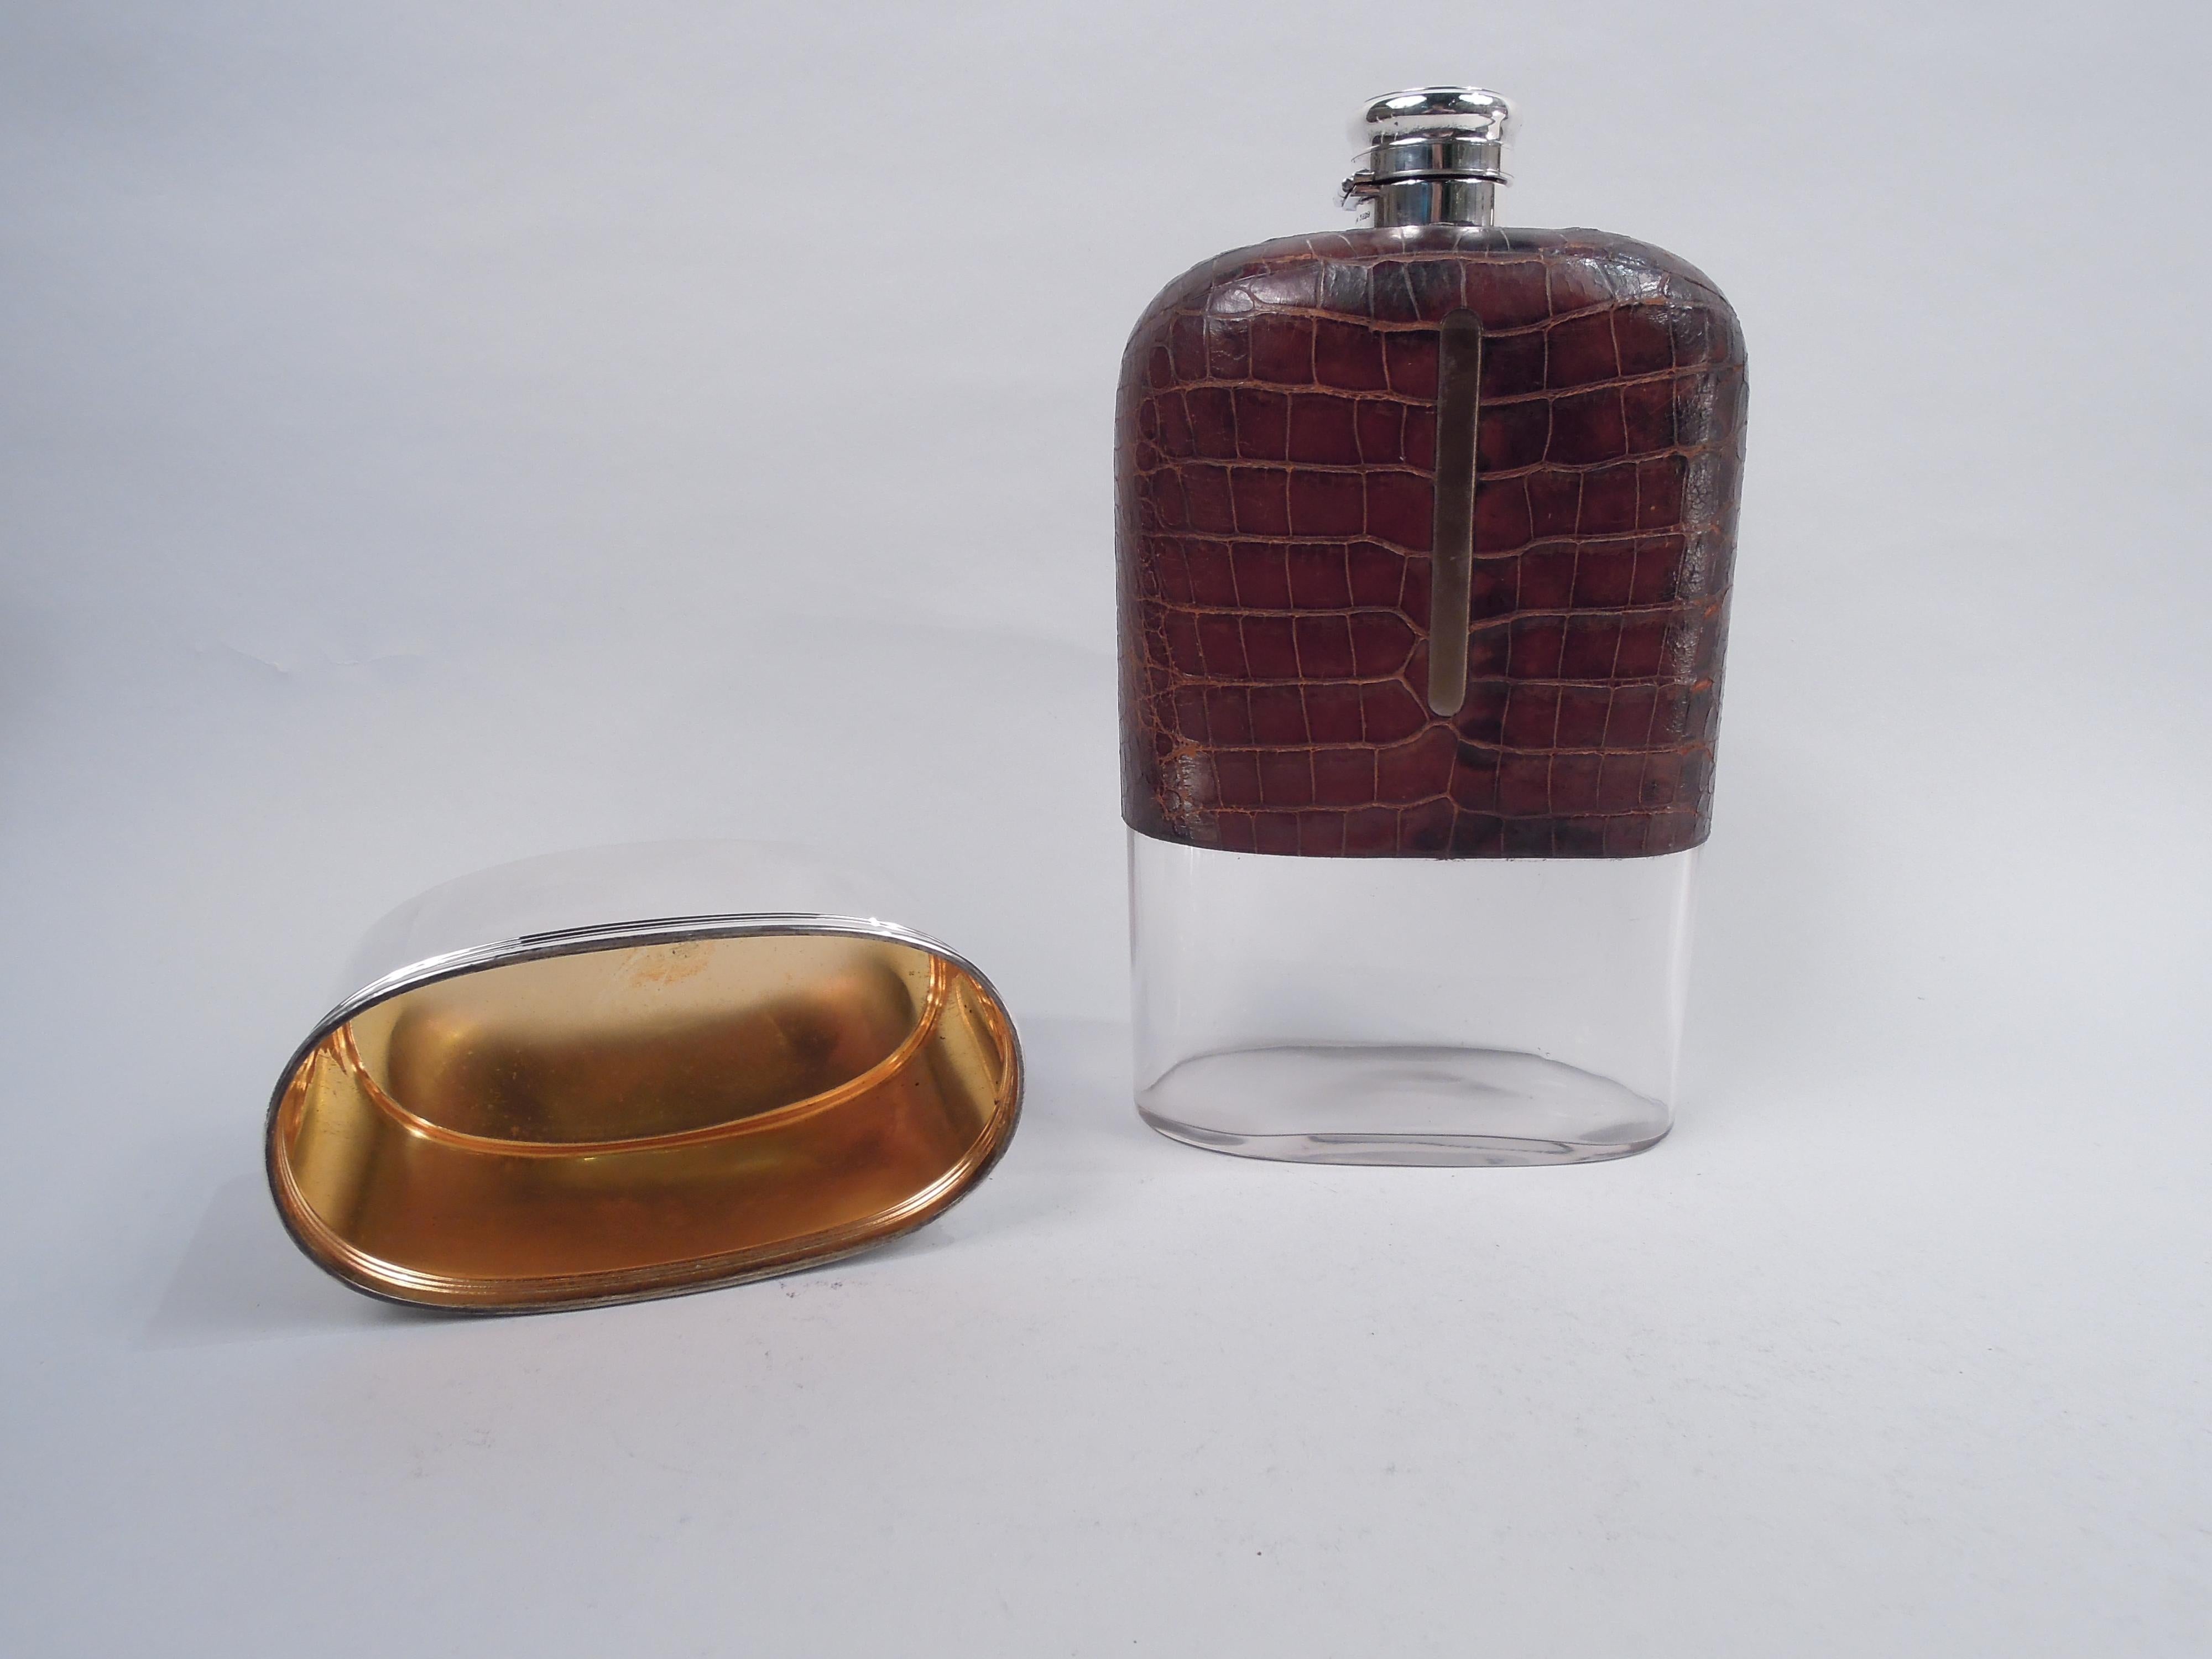 Gorham Jumbo Sterling Silver & Leather Safari Flask, 1896 In Good Condition For Sale In New York, NY